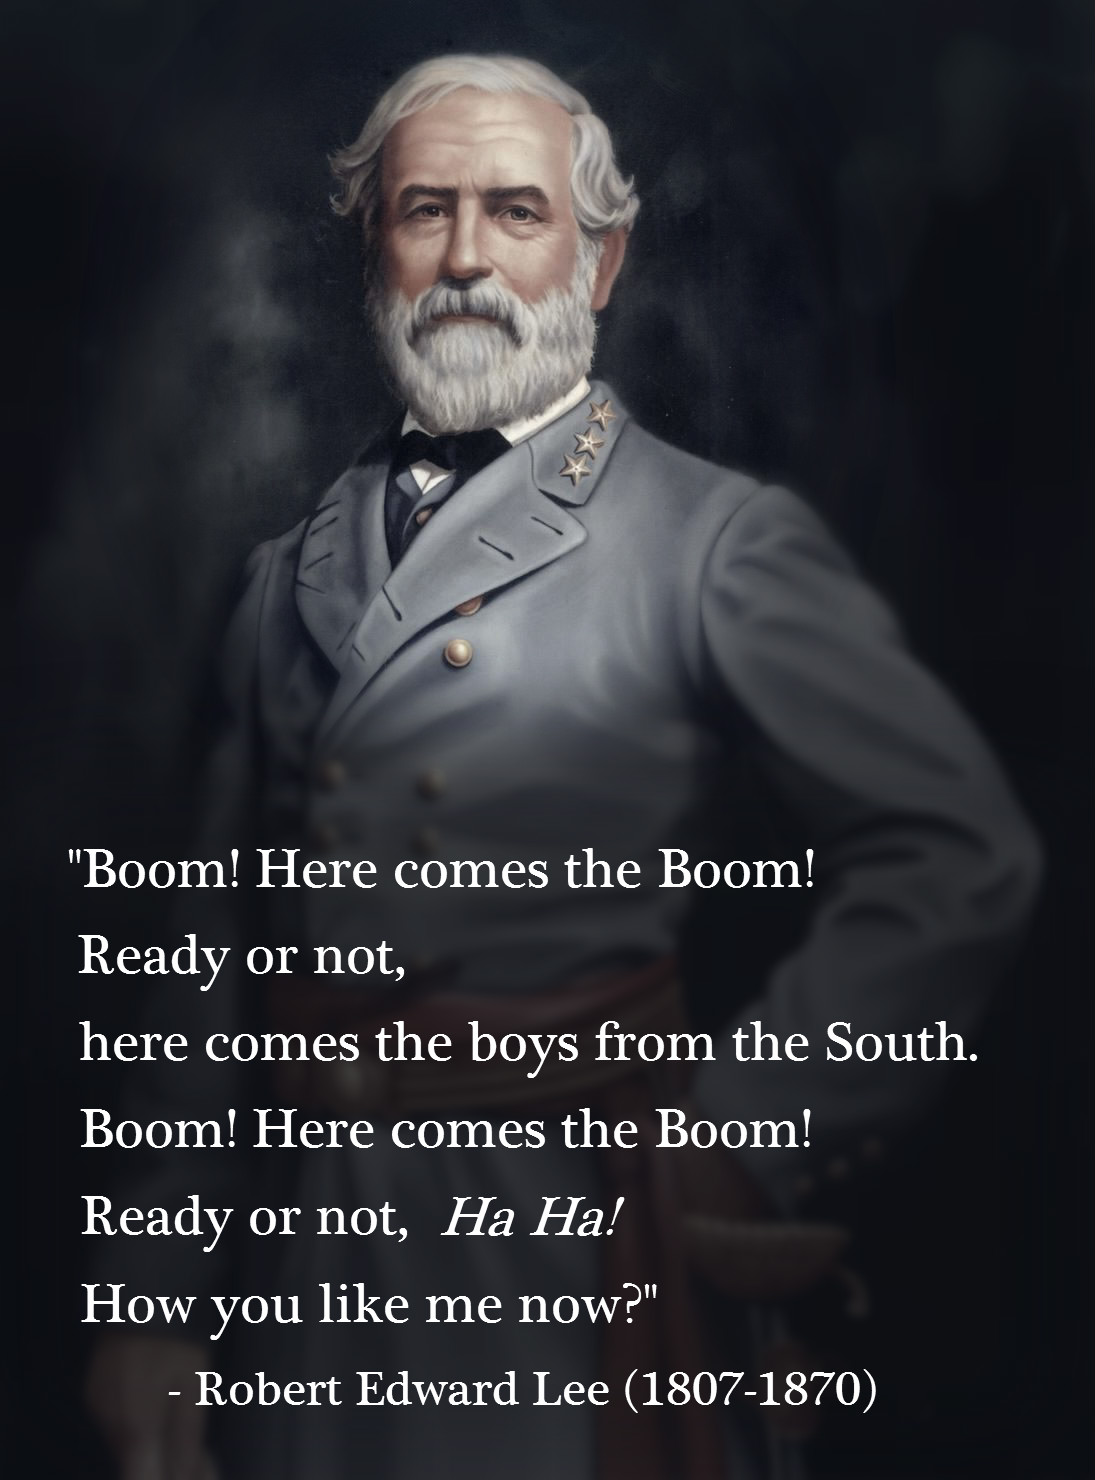 Robert E Lee Quotes On Slavery. QuotesGram